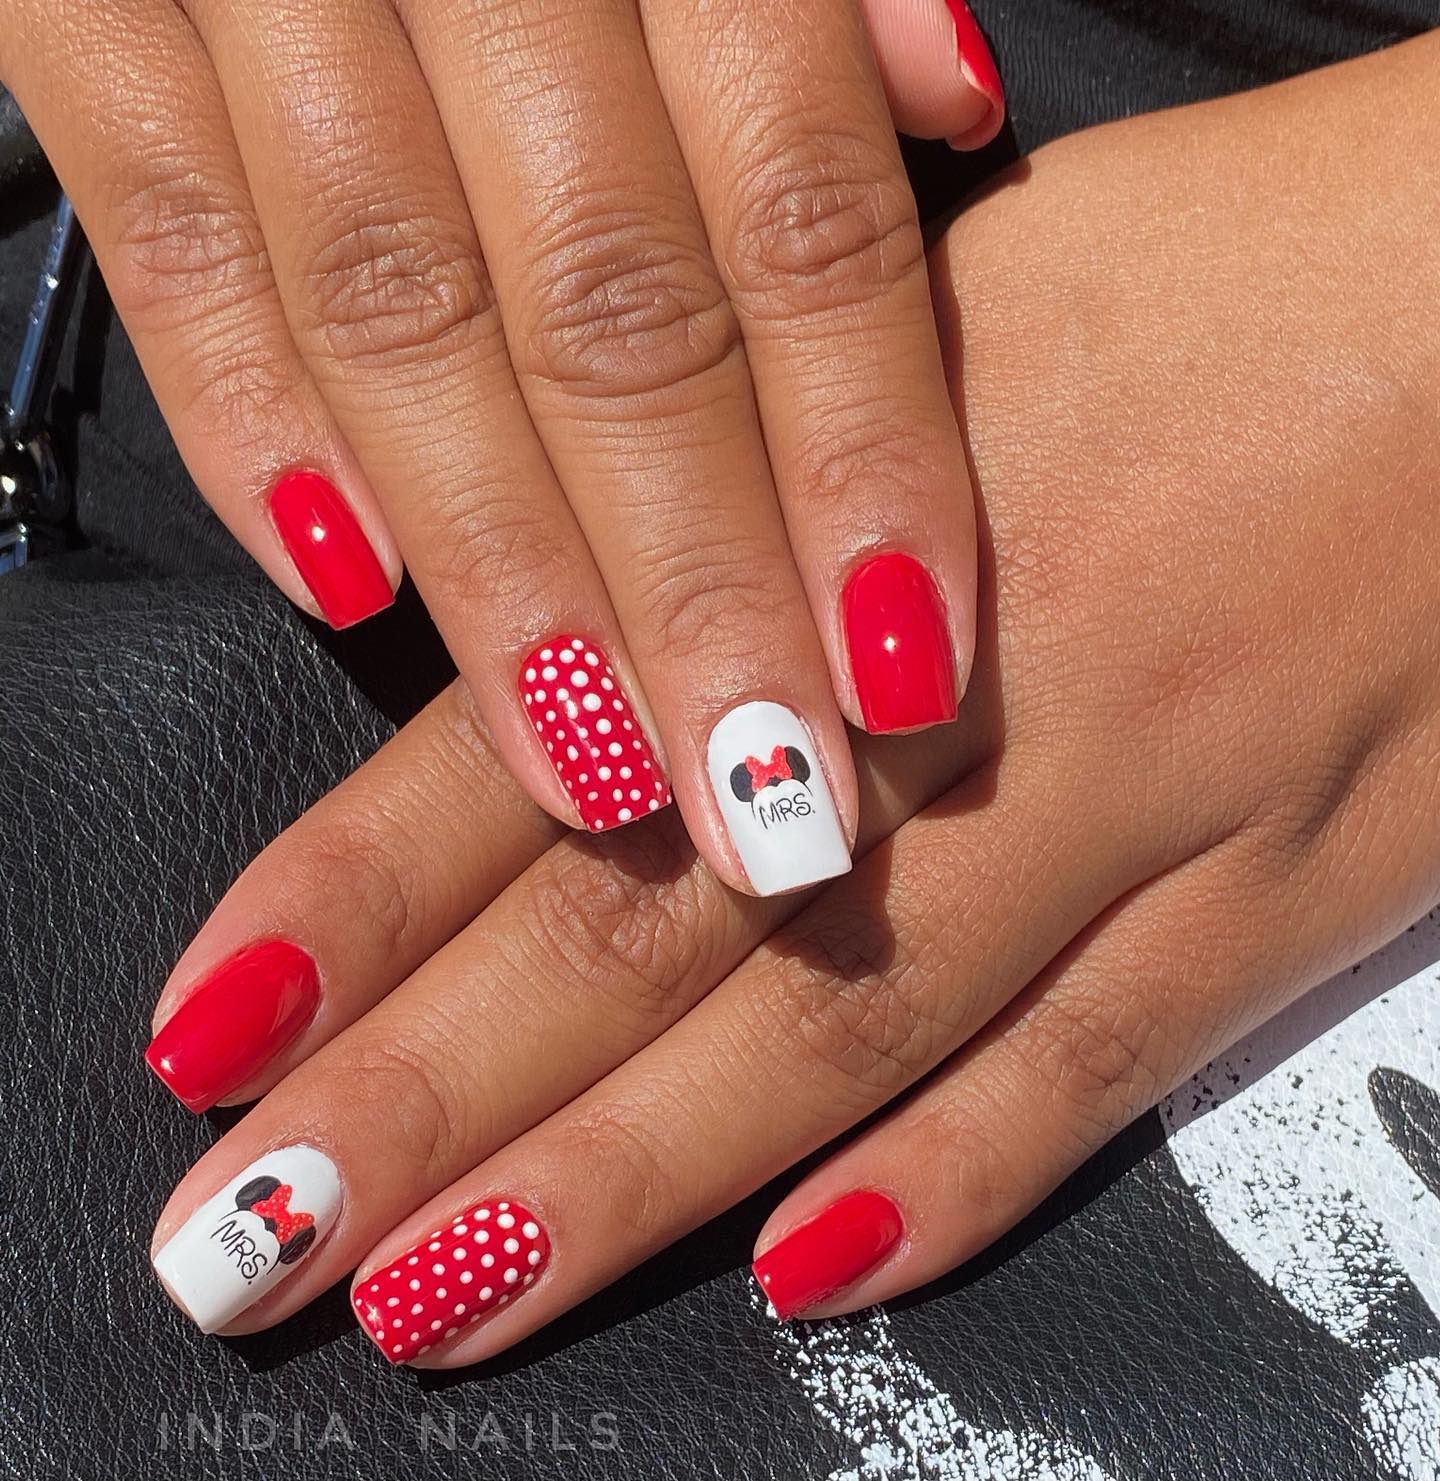 It's sure that there are some Mickey mouse fans. You can combine Mickey with your red nail design.